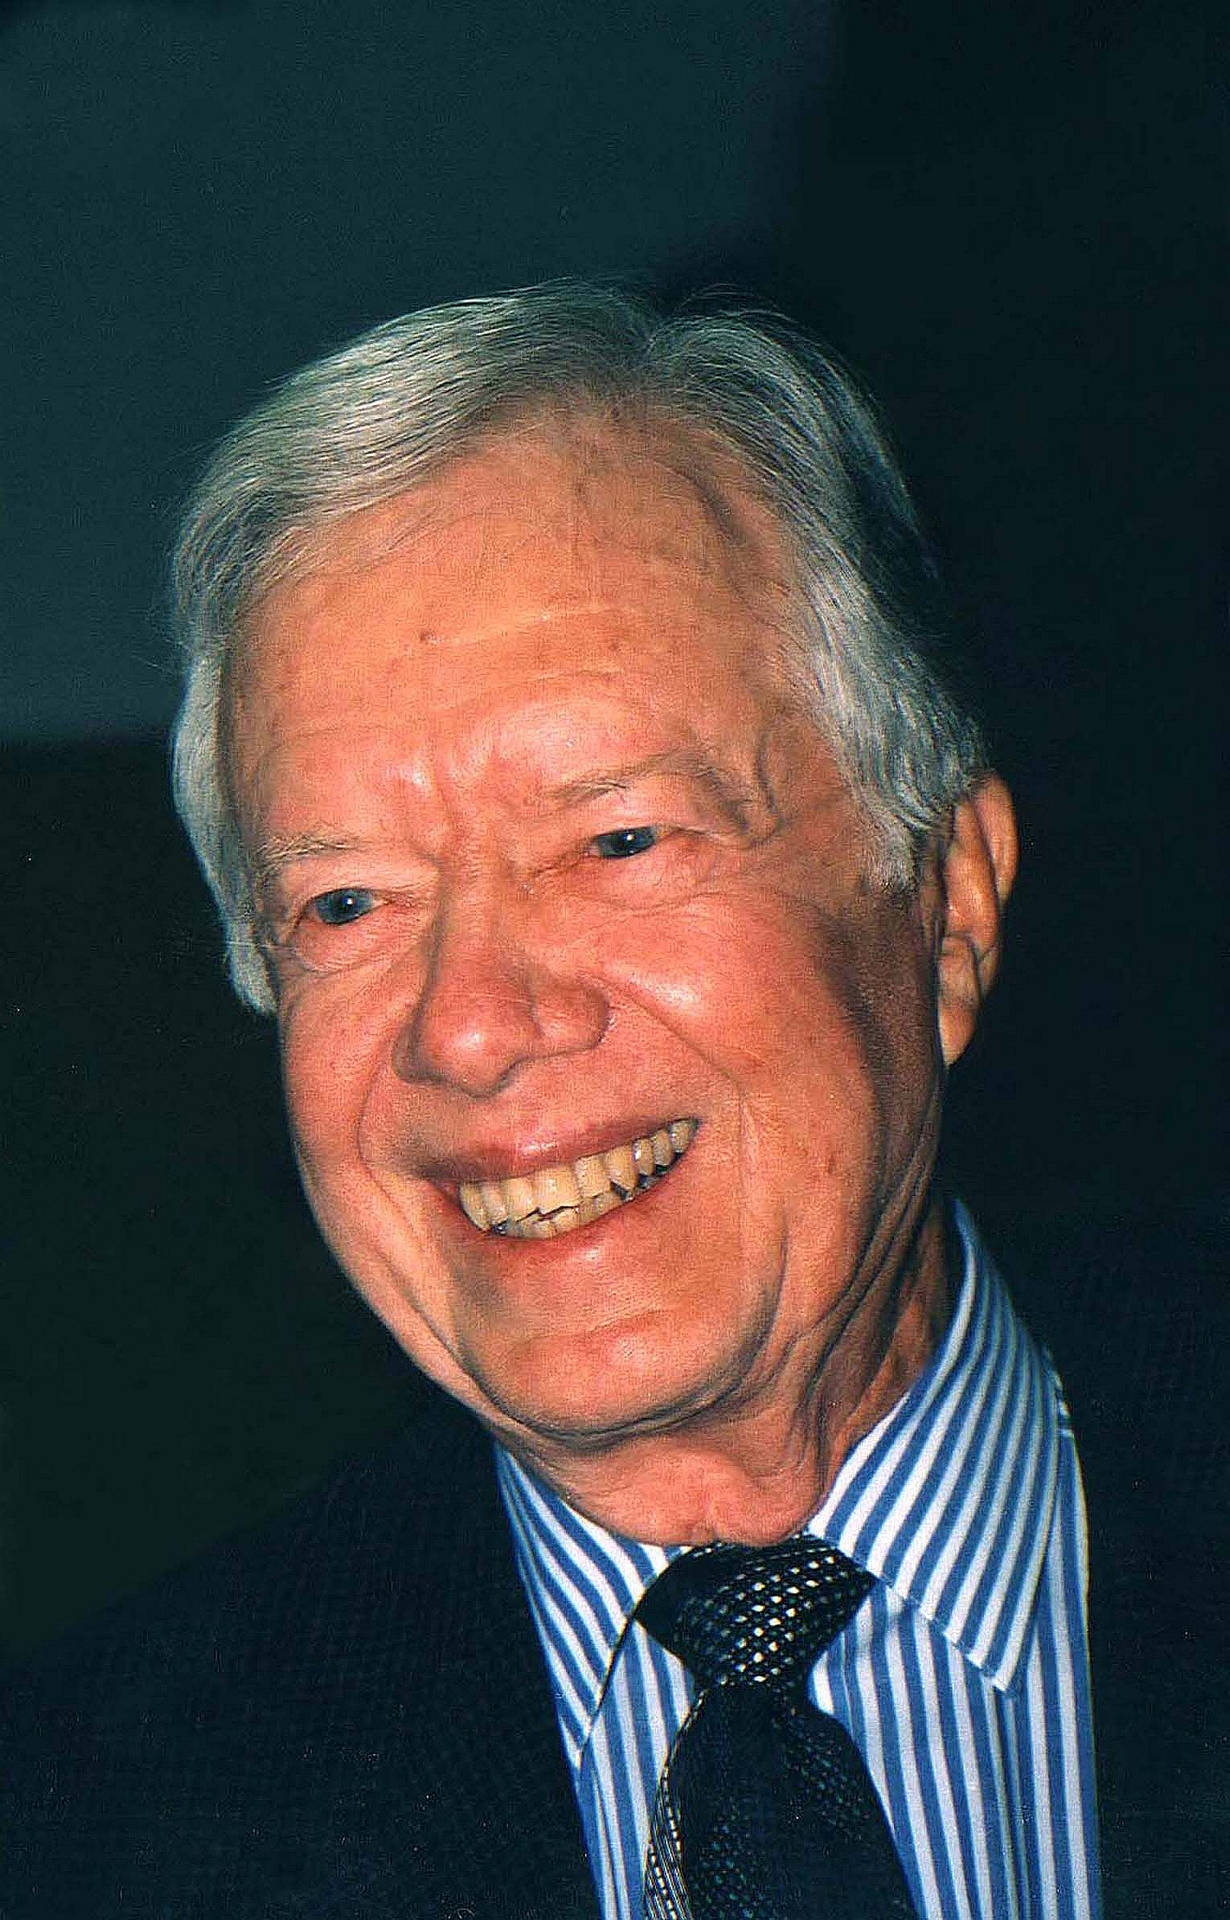 A Warm Smile From The 39th President - Jimmy Carter Wallpaper